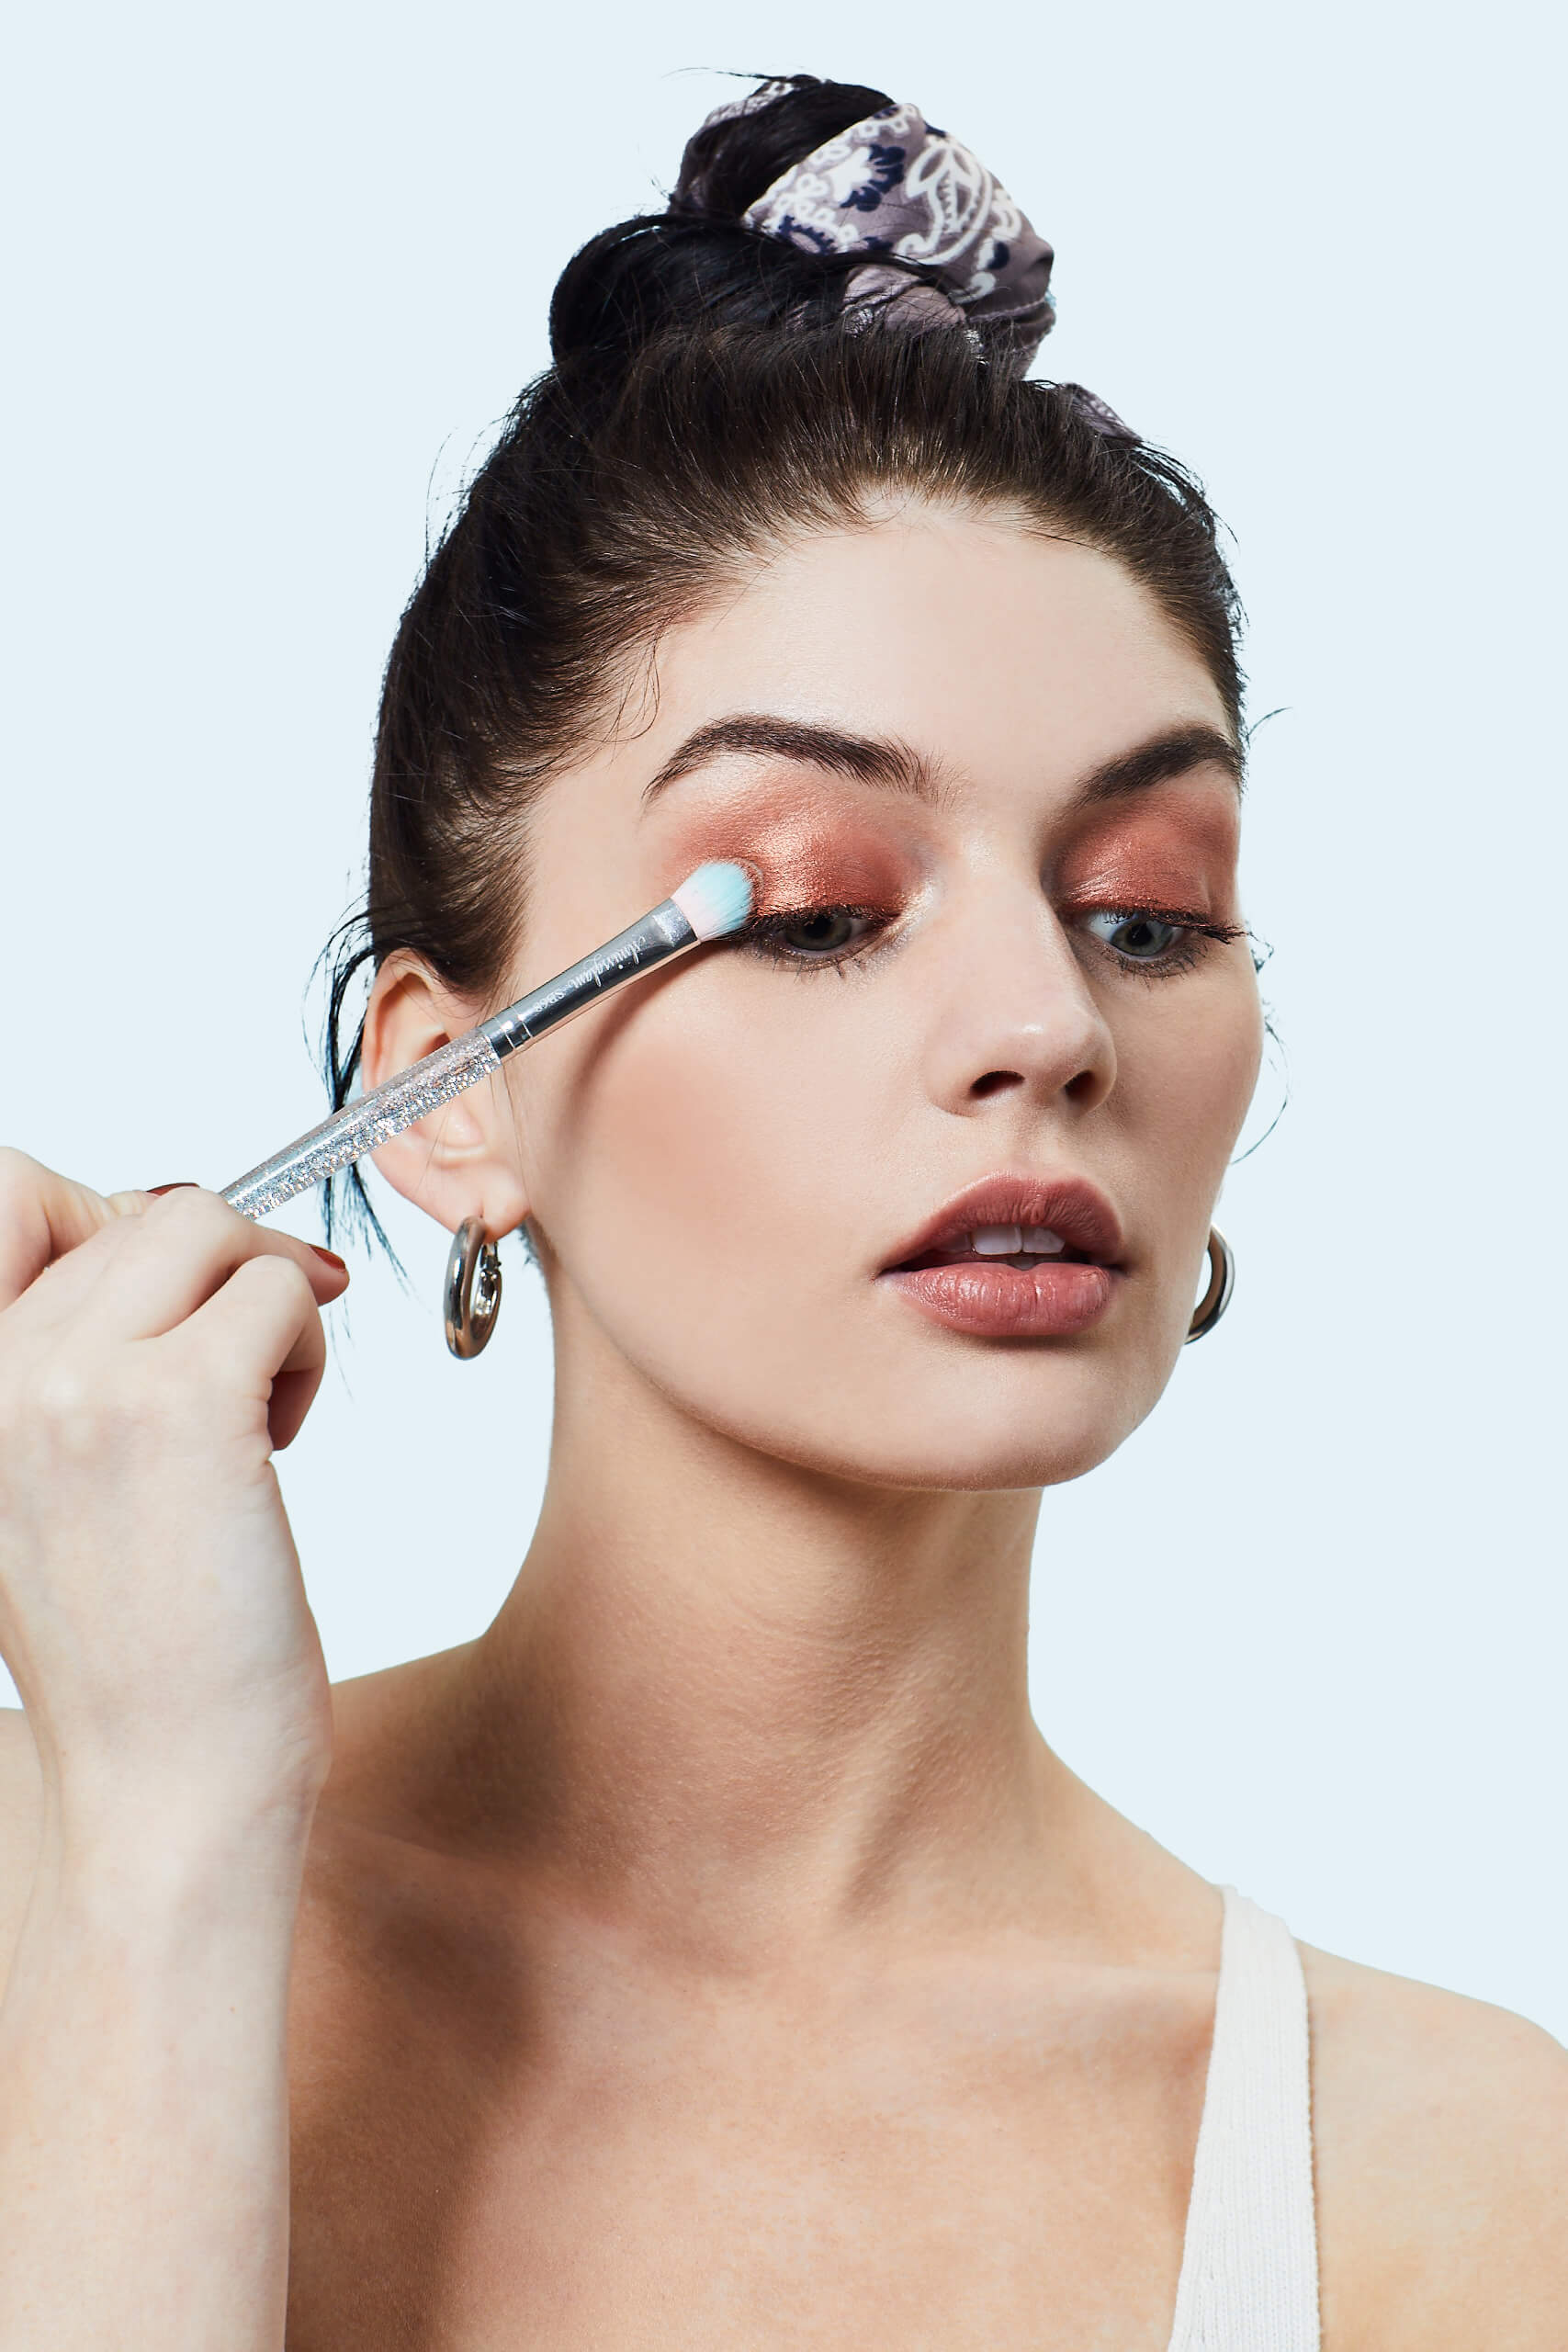 A photo of a woman applying a shimmery bronze eyeshadow using a small brush